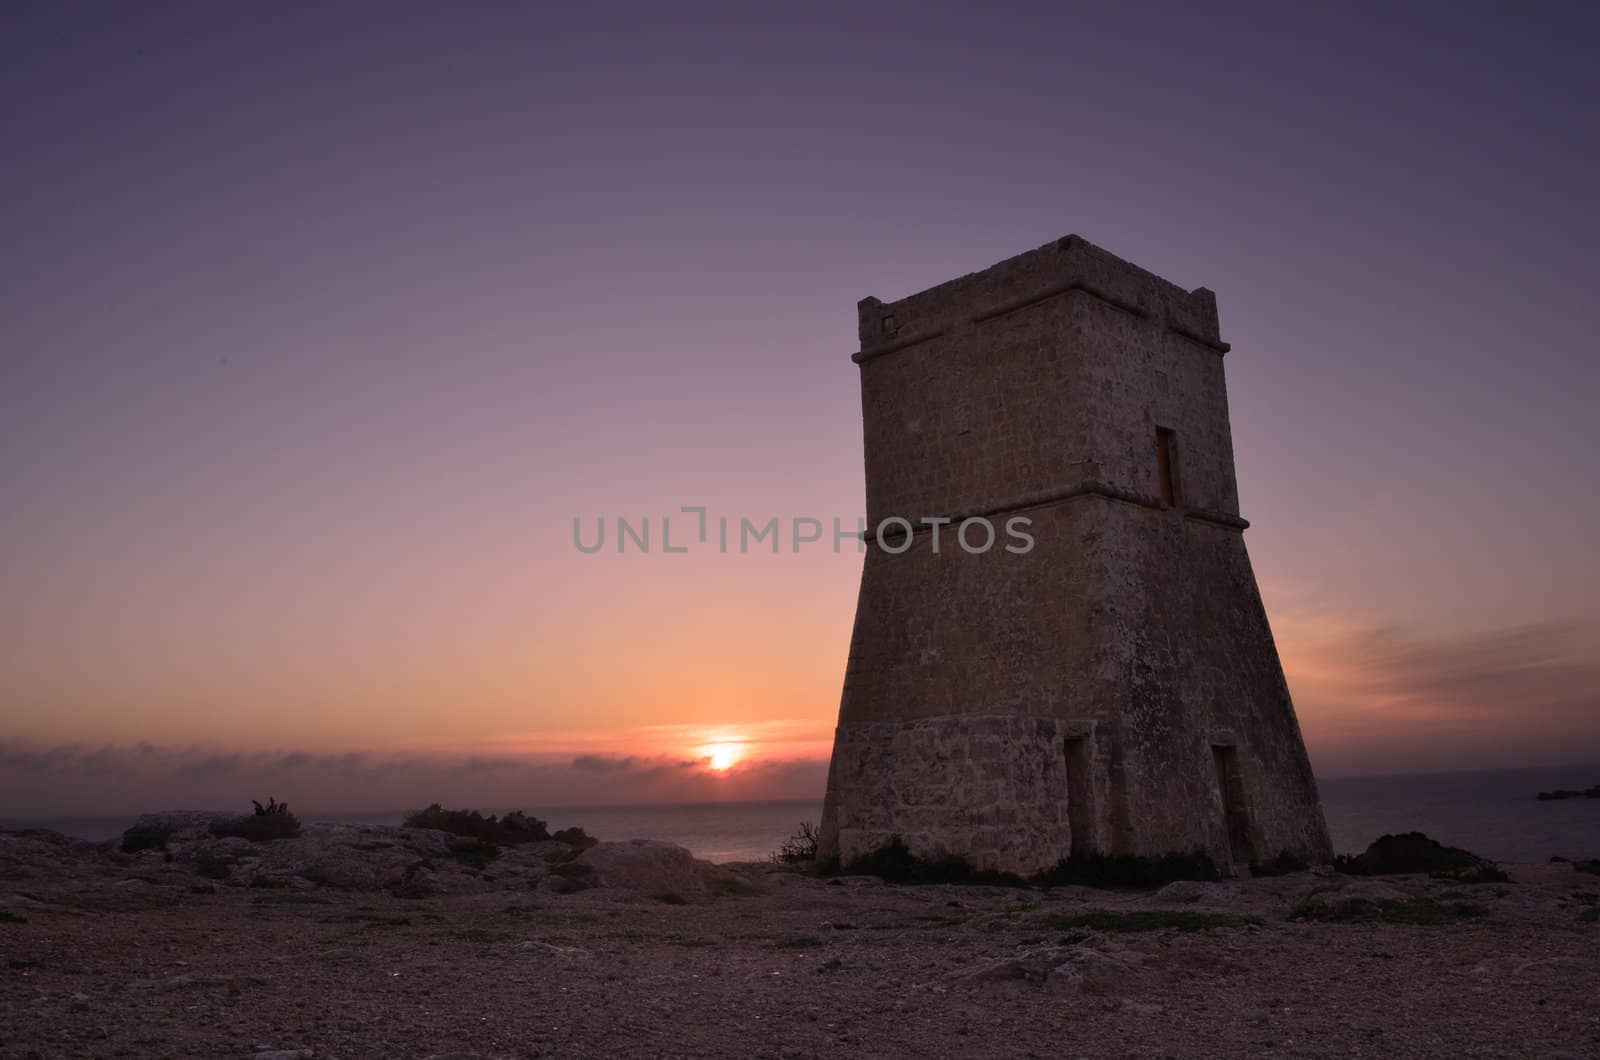 Sunset behind the tower - Malta